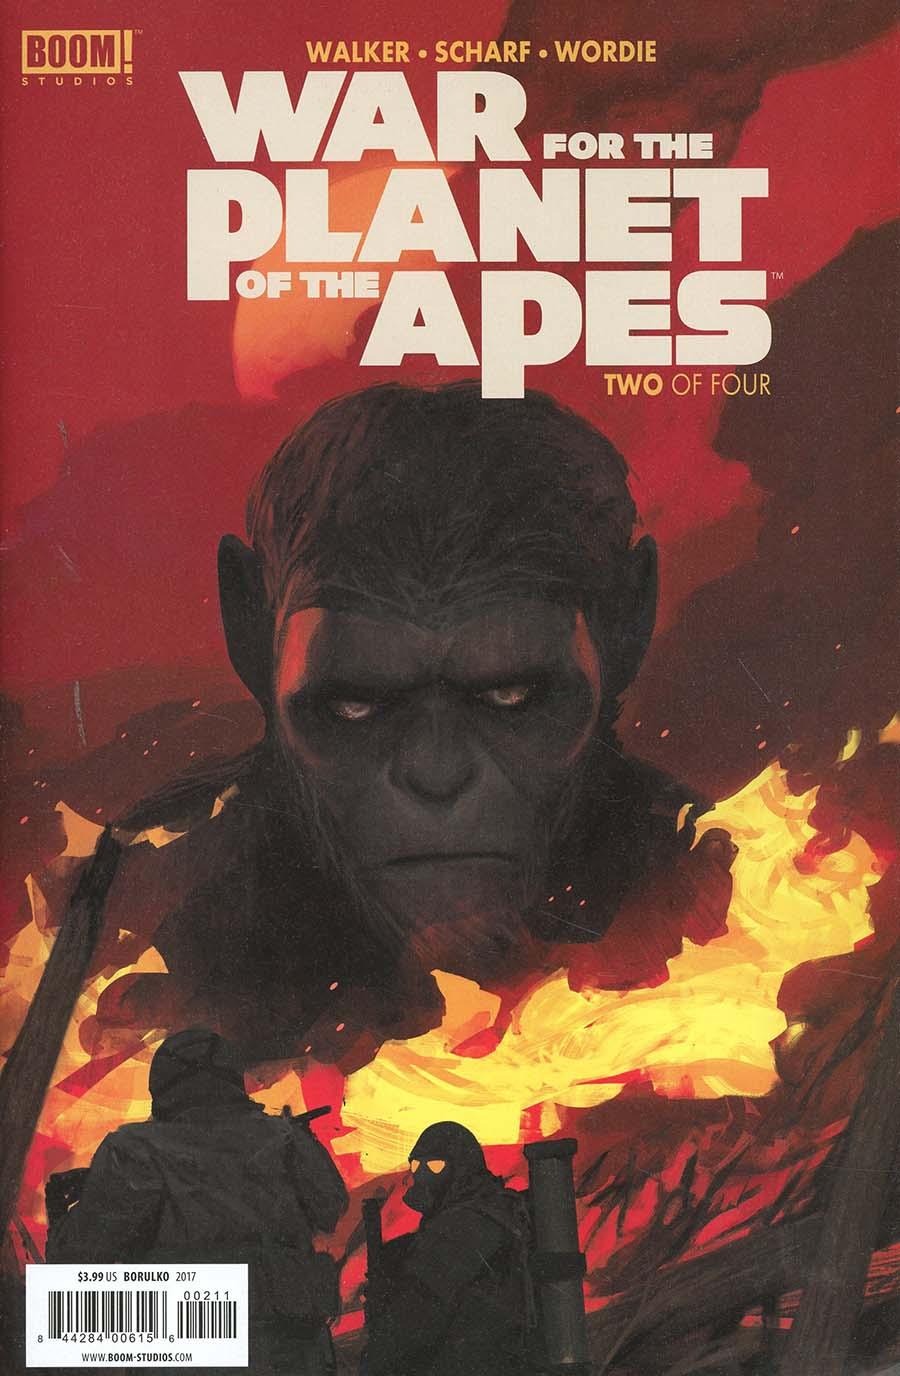 War For The Planet Of The Apes Vol. 1 #2